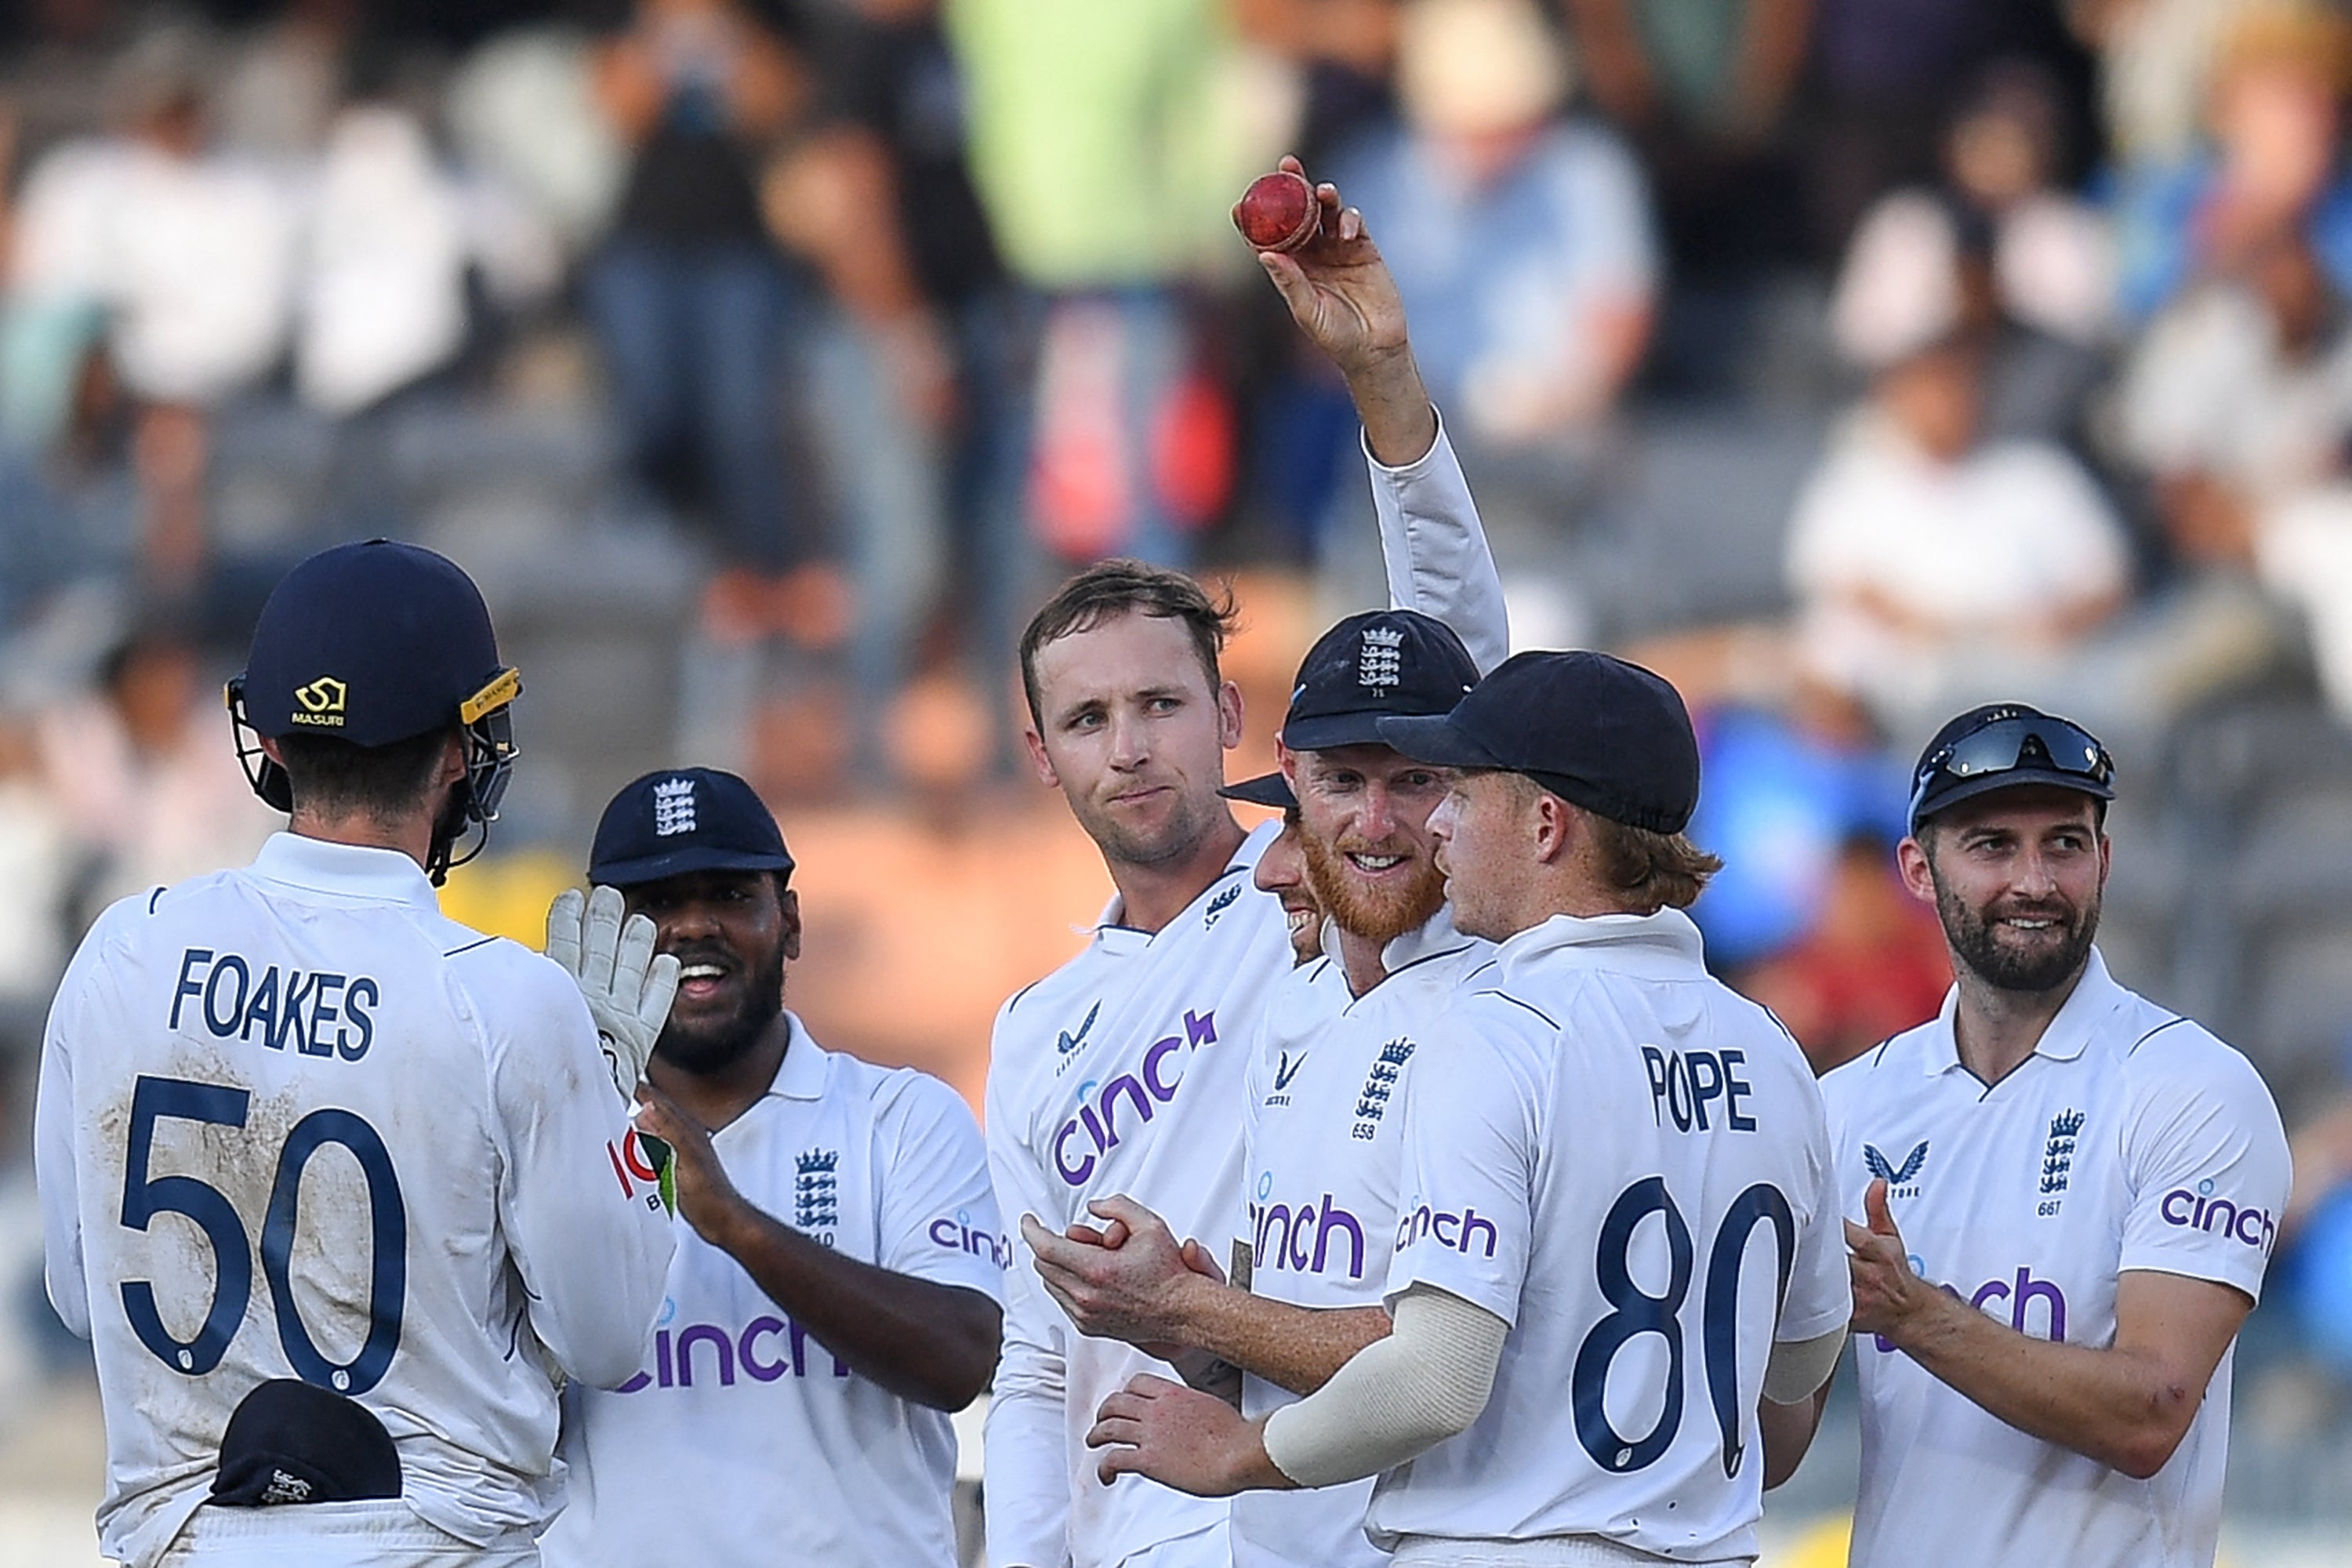 England spinner Tom Hartley dismantled the Indian battling line-up in the first Test match